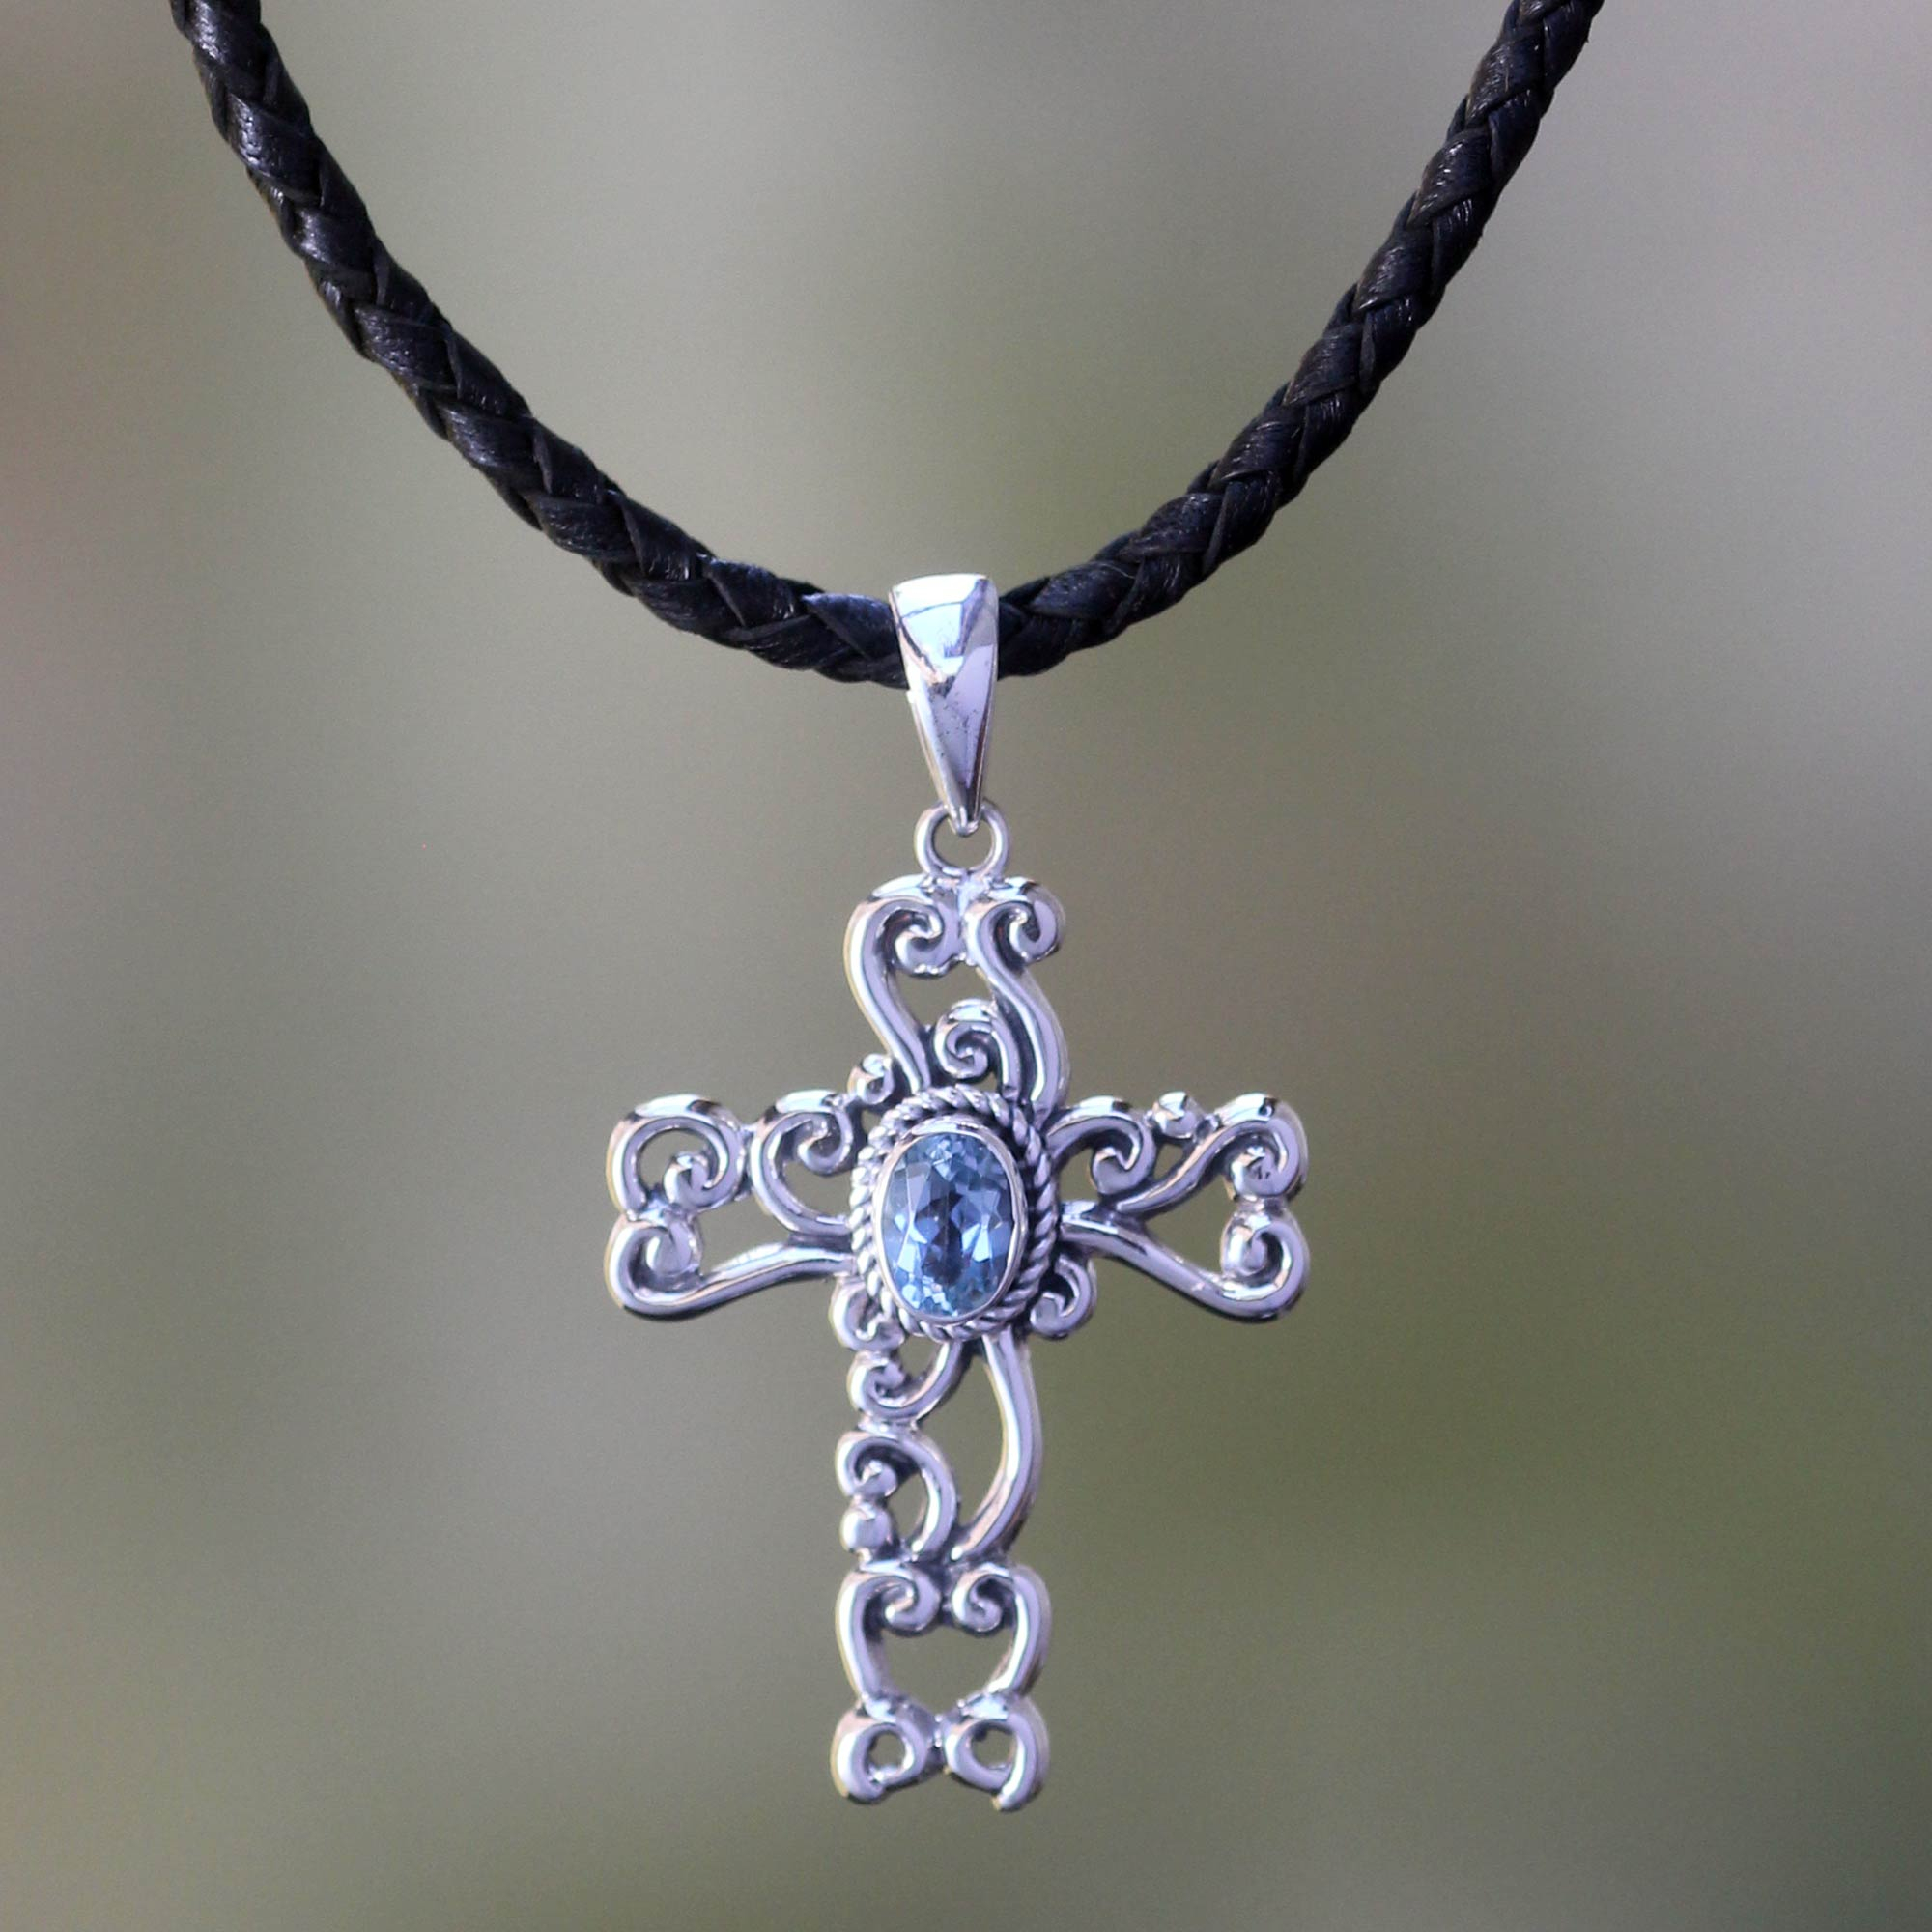 NOVICA .925 Sterling Silver and Garnet Cross Pendant Necklace with Leather Cord 18,Balinese Cross